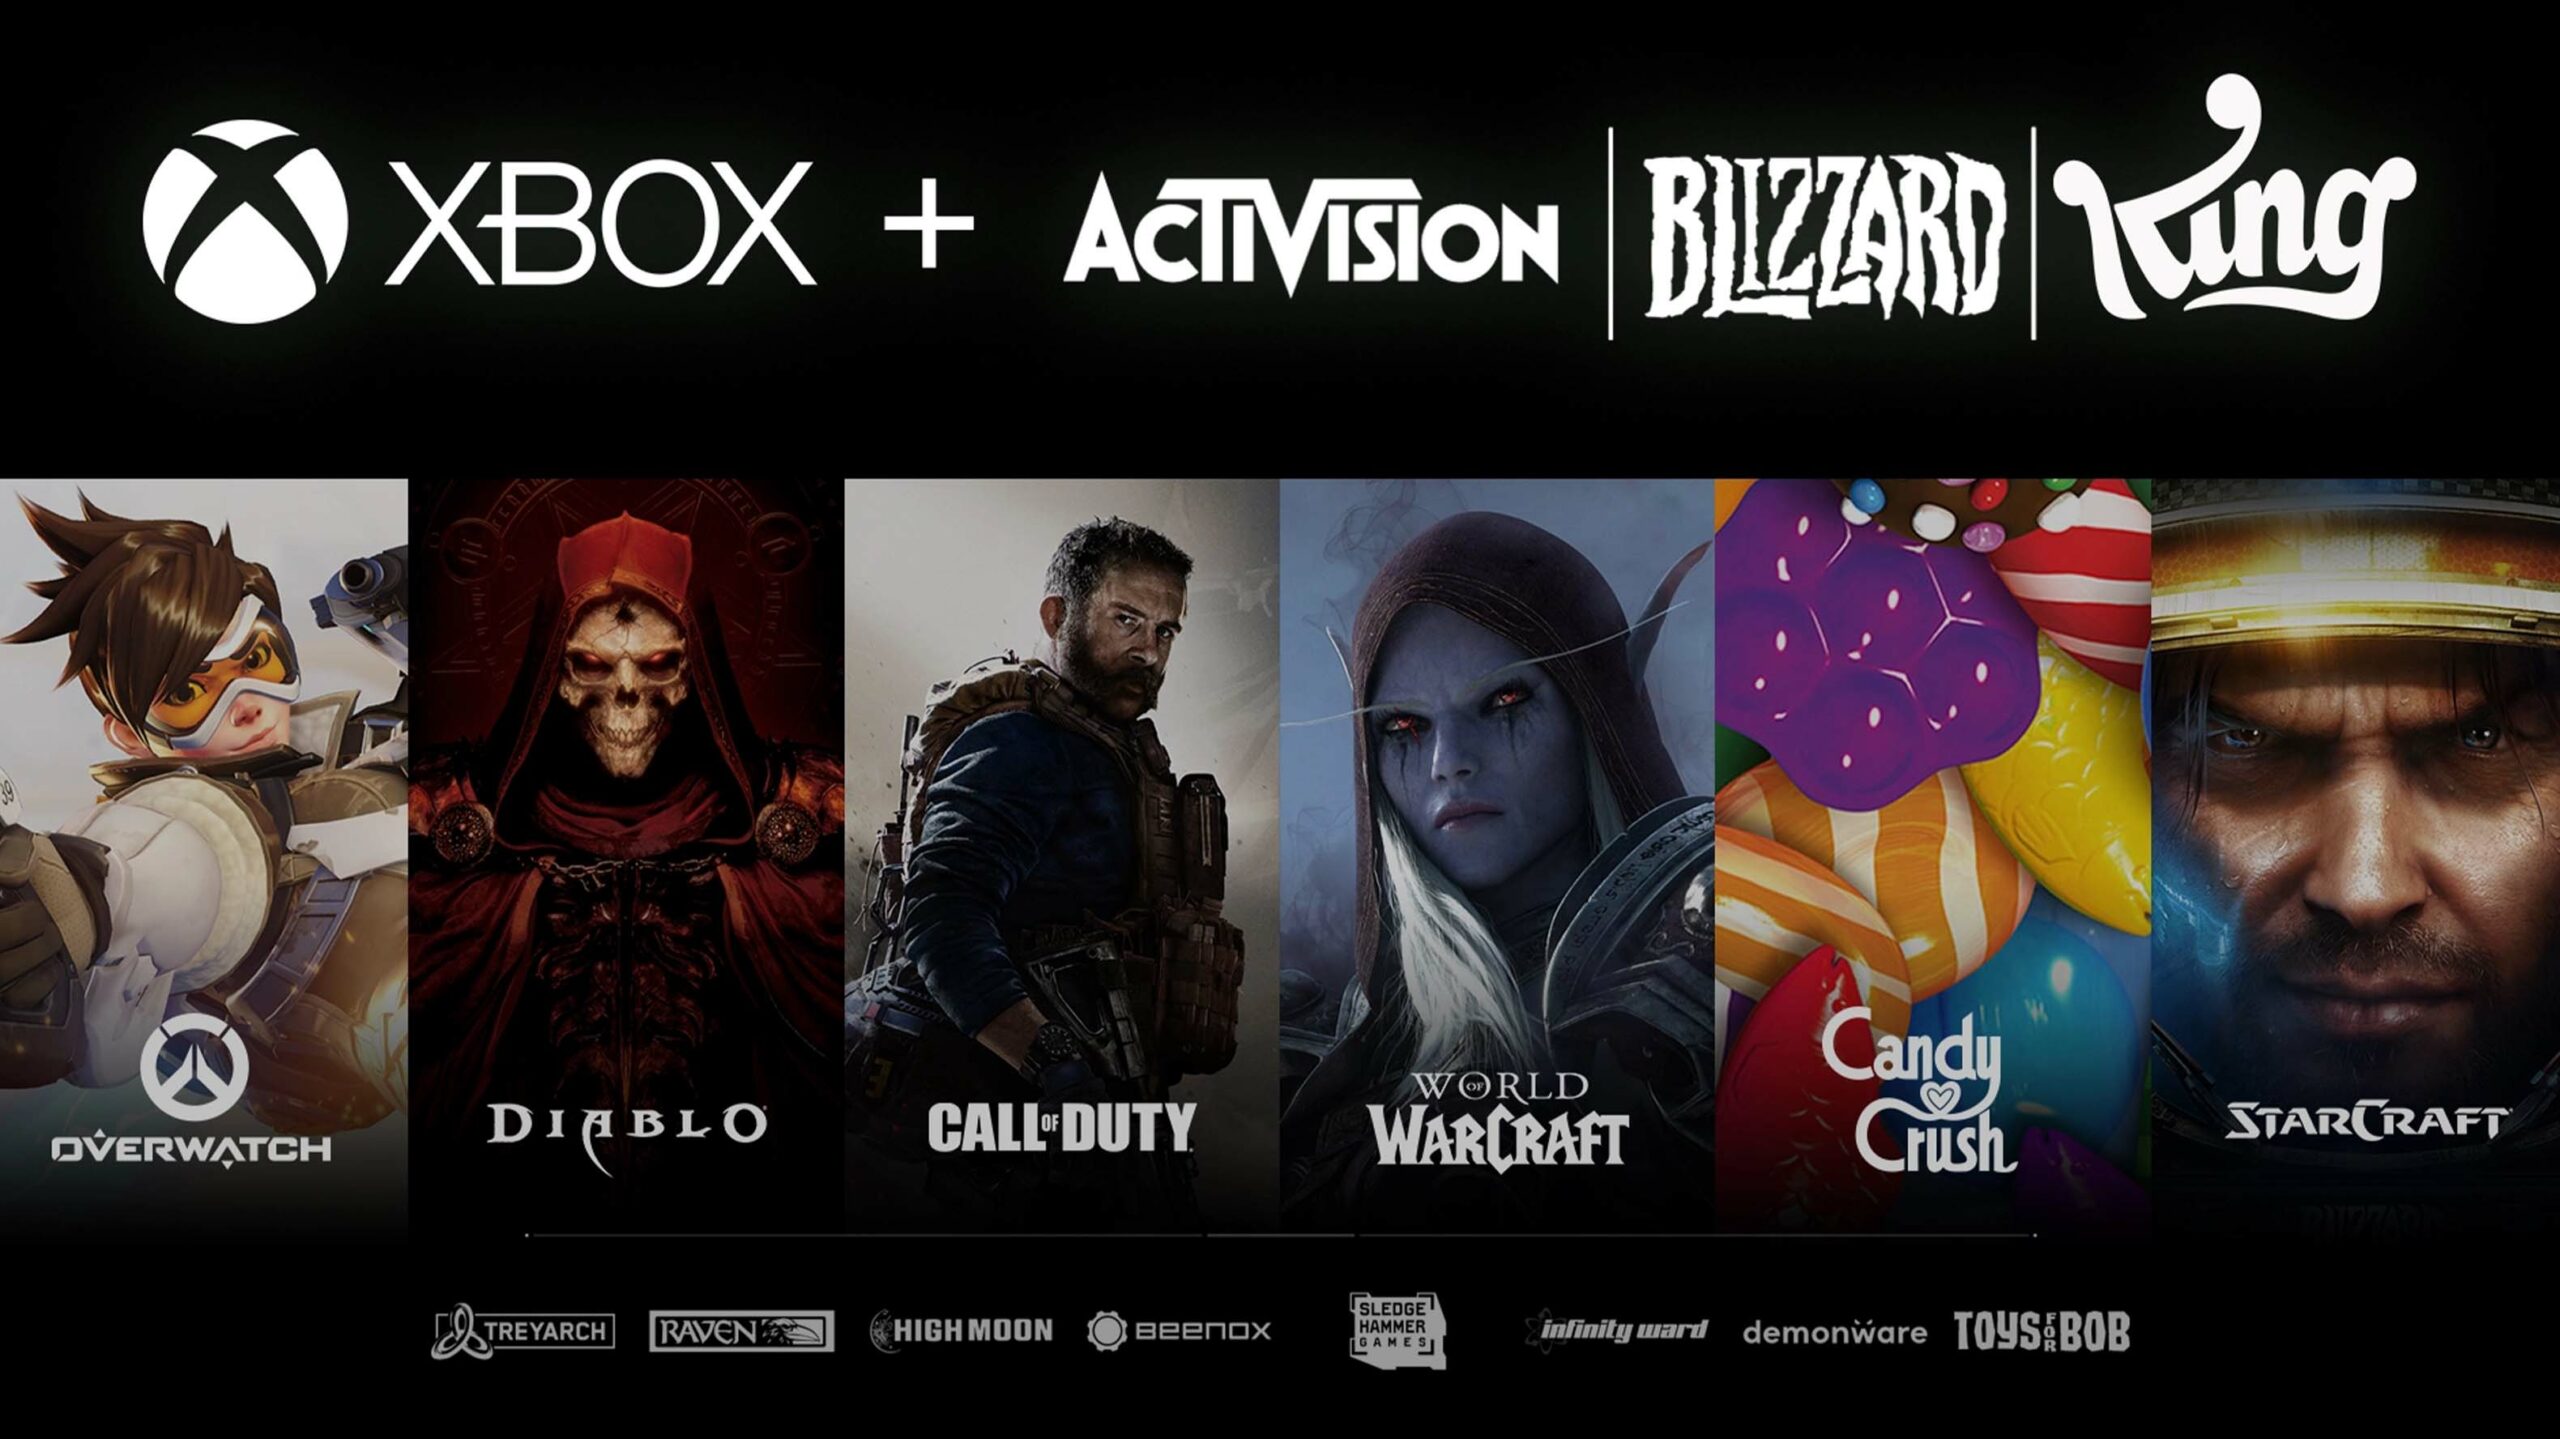 Xbox Game Pass Confirms 10 Games for December 2023